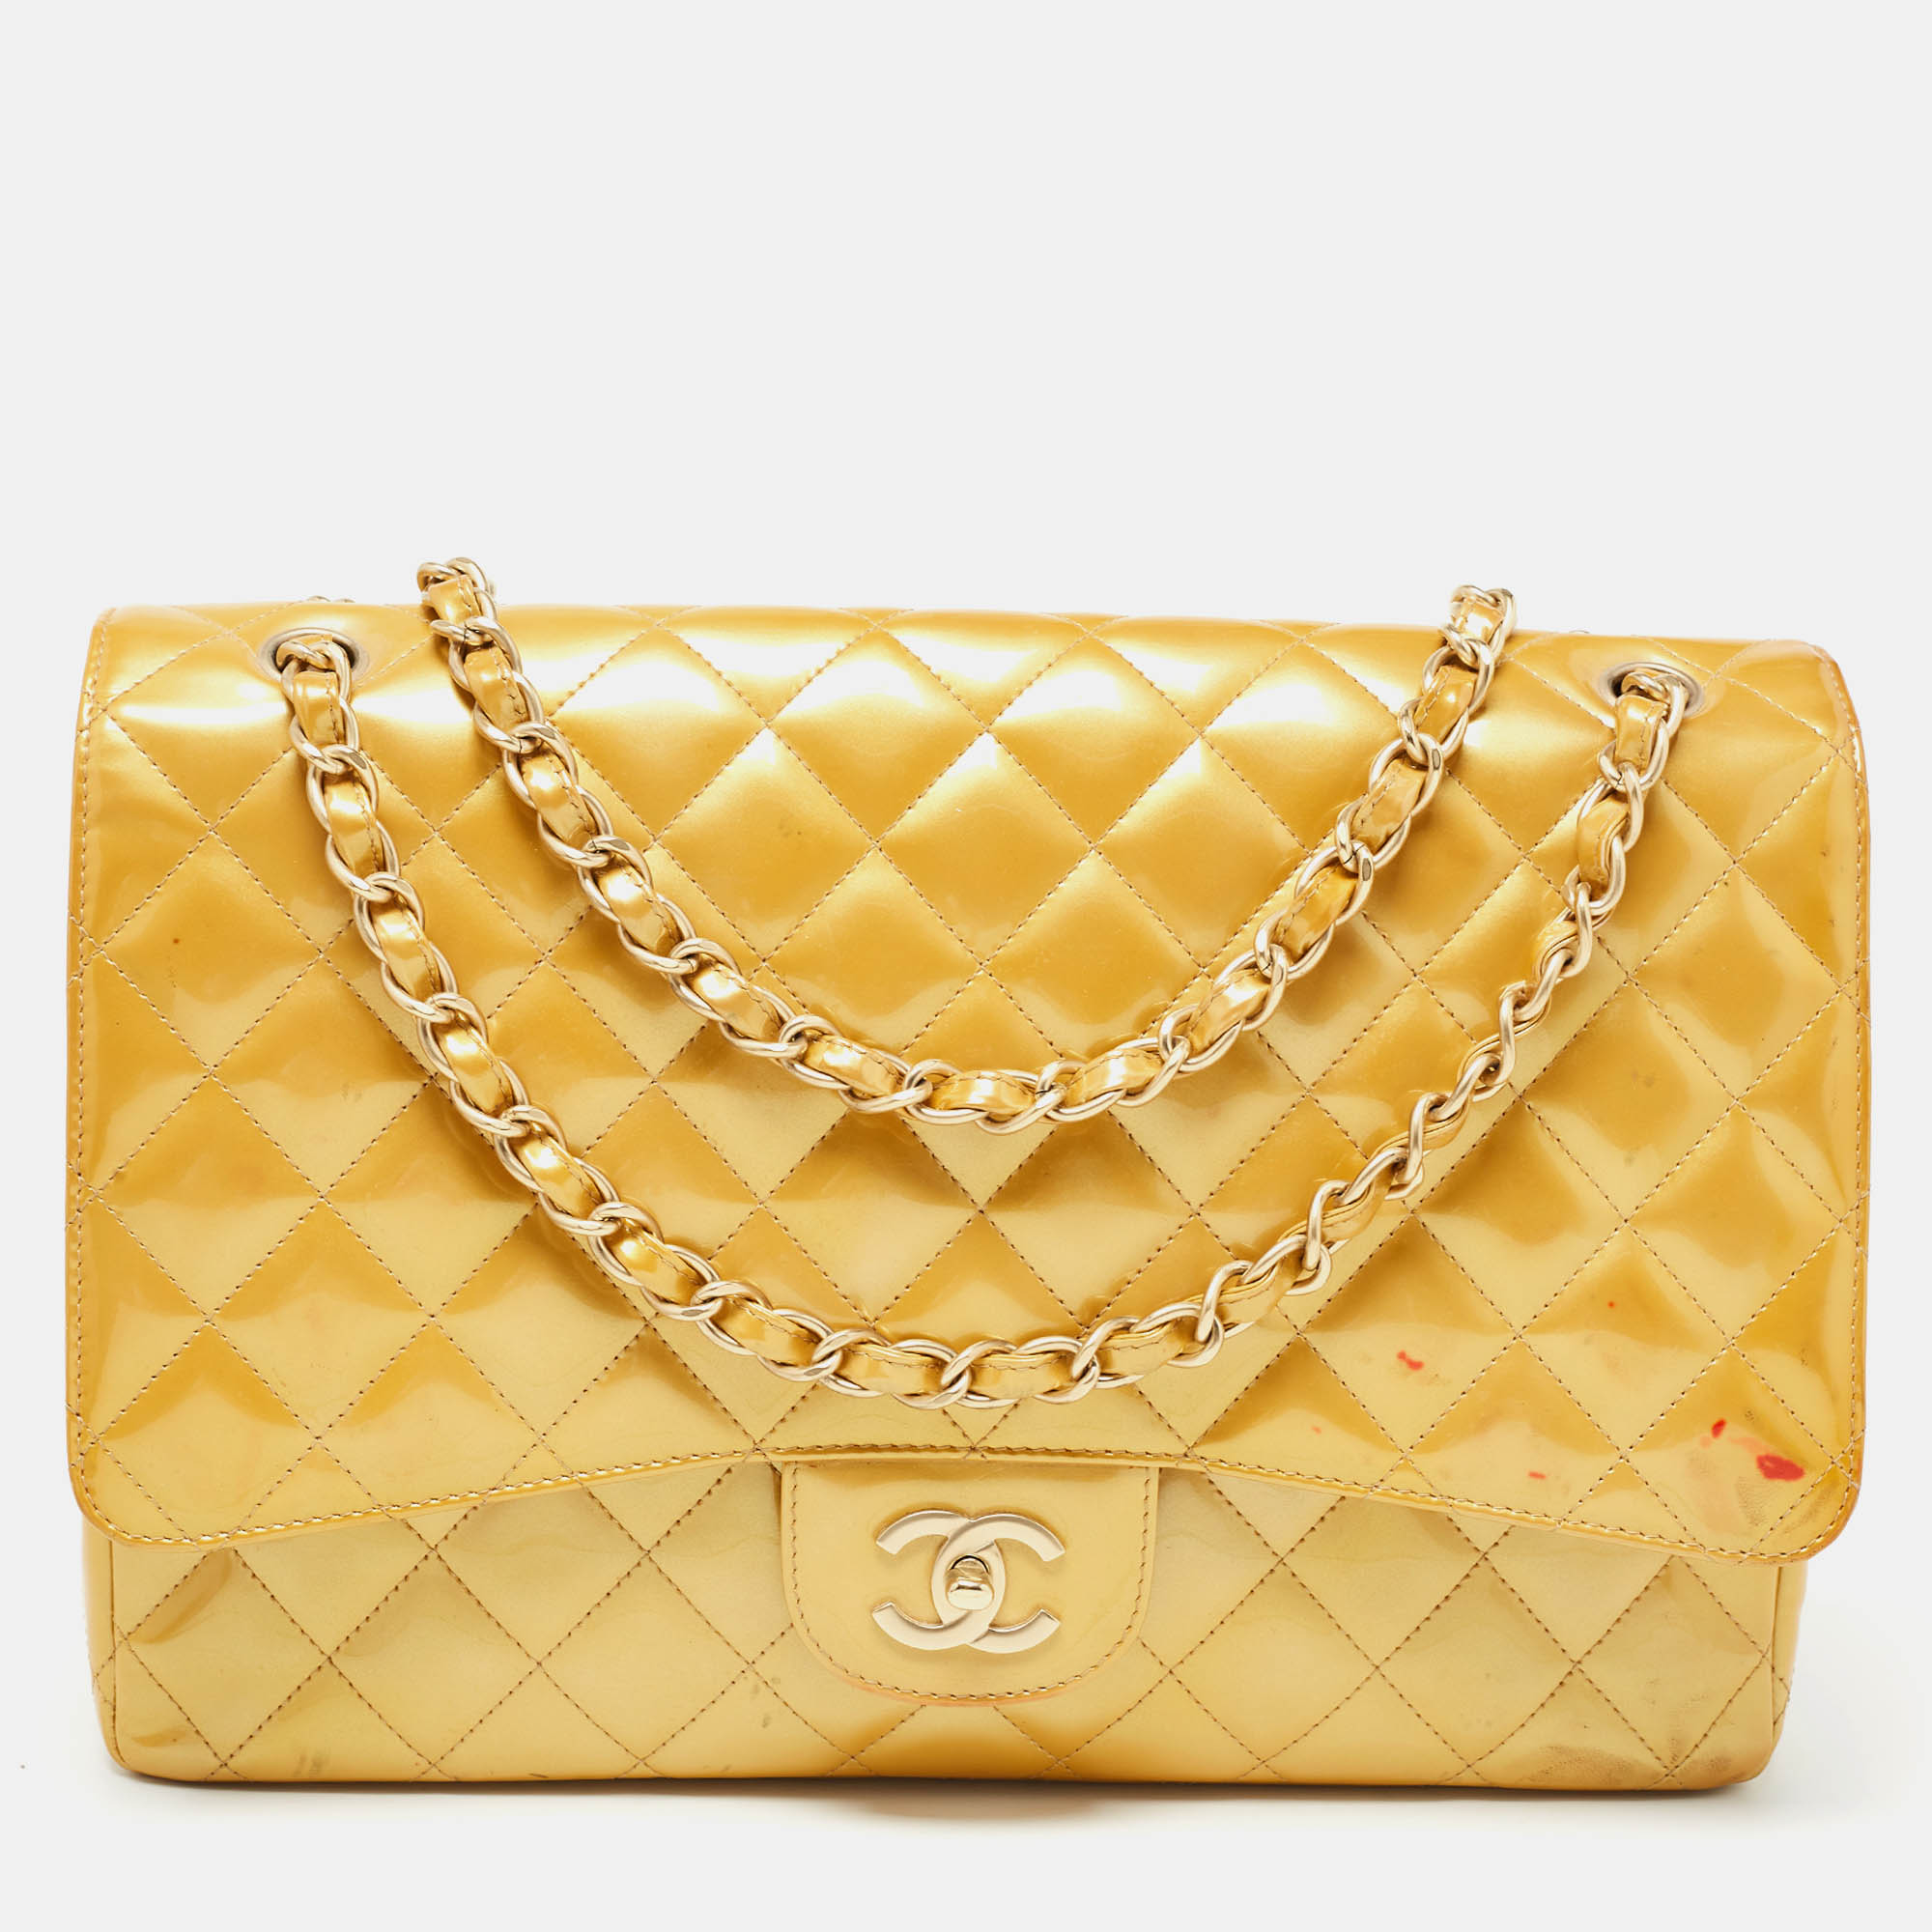 Chanel gold quilted patent leather maxi classic single flap bag